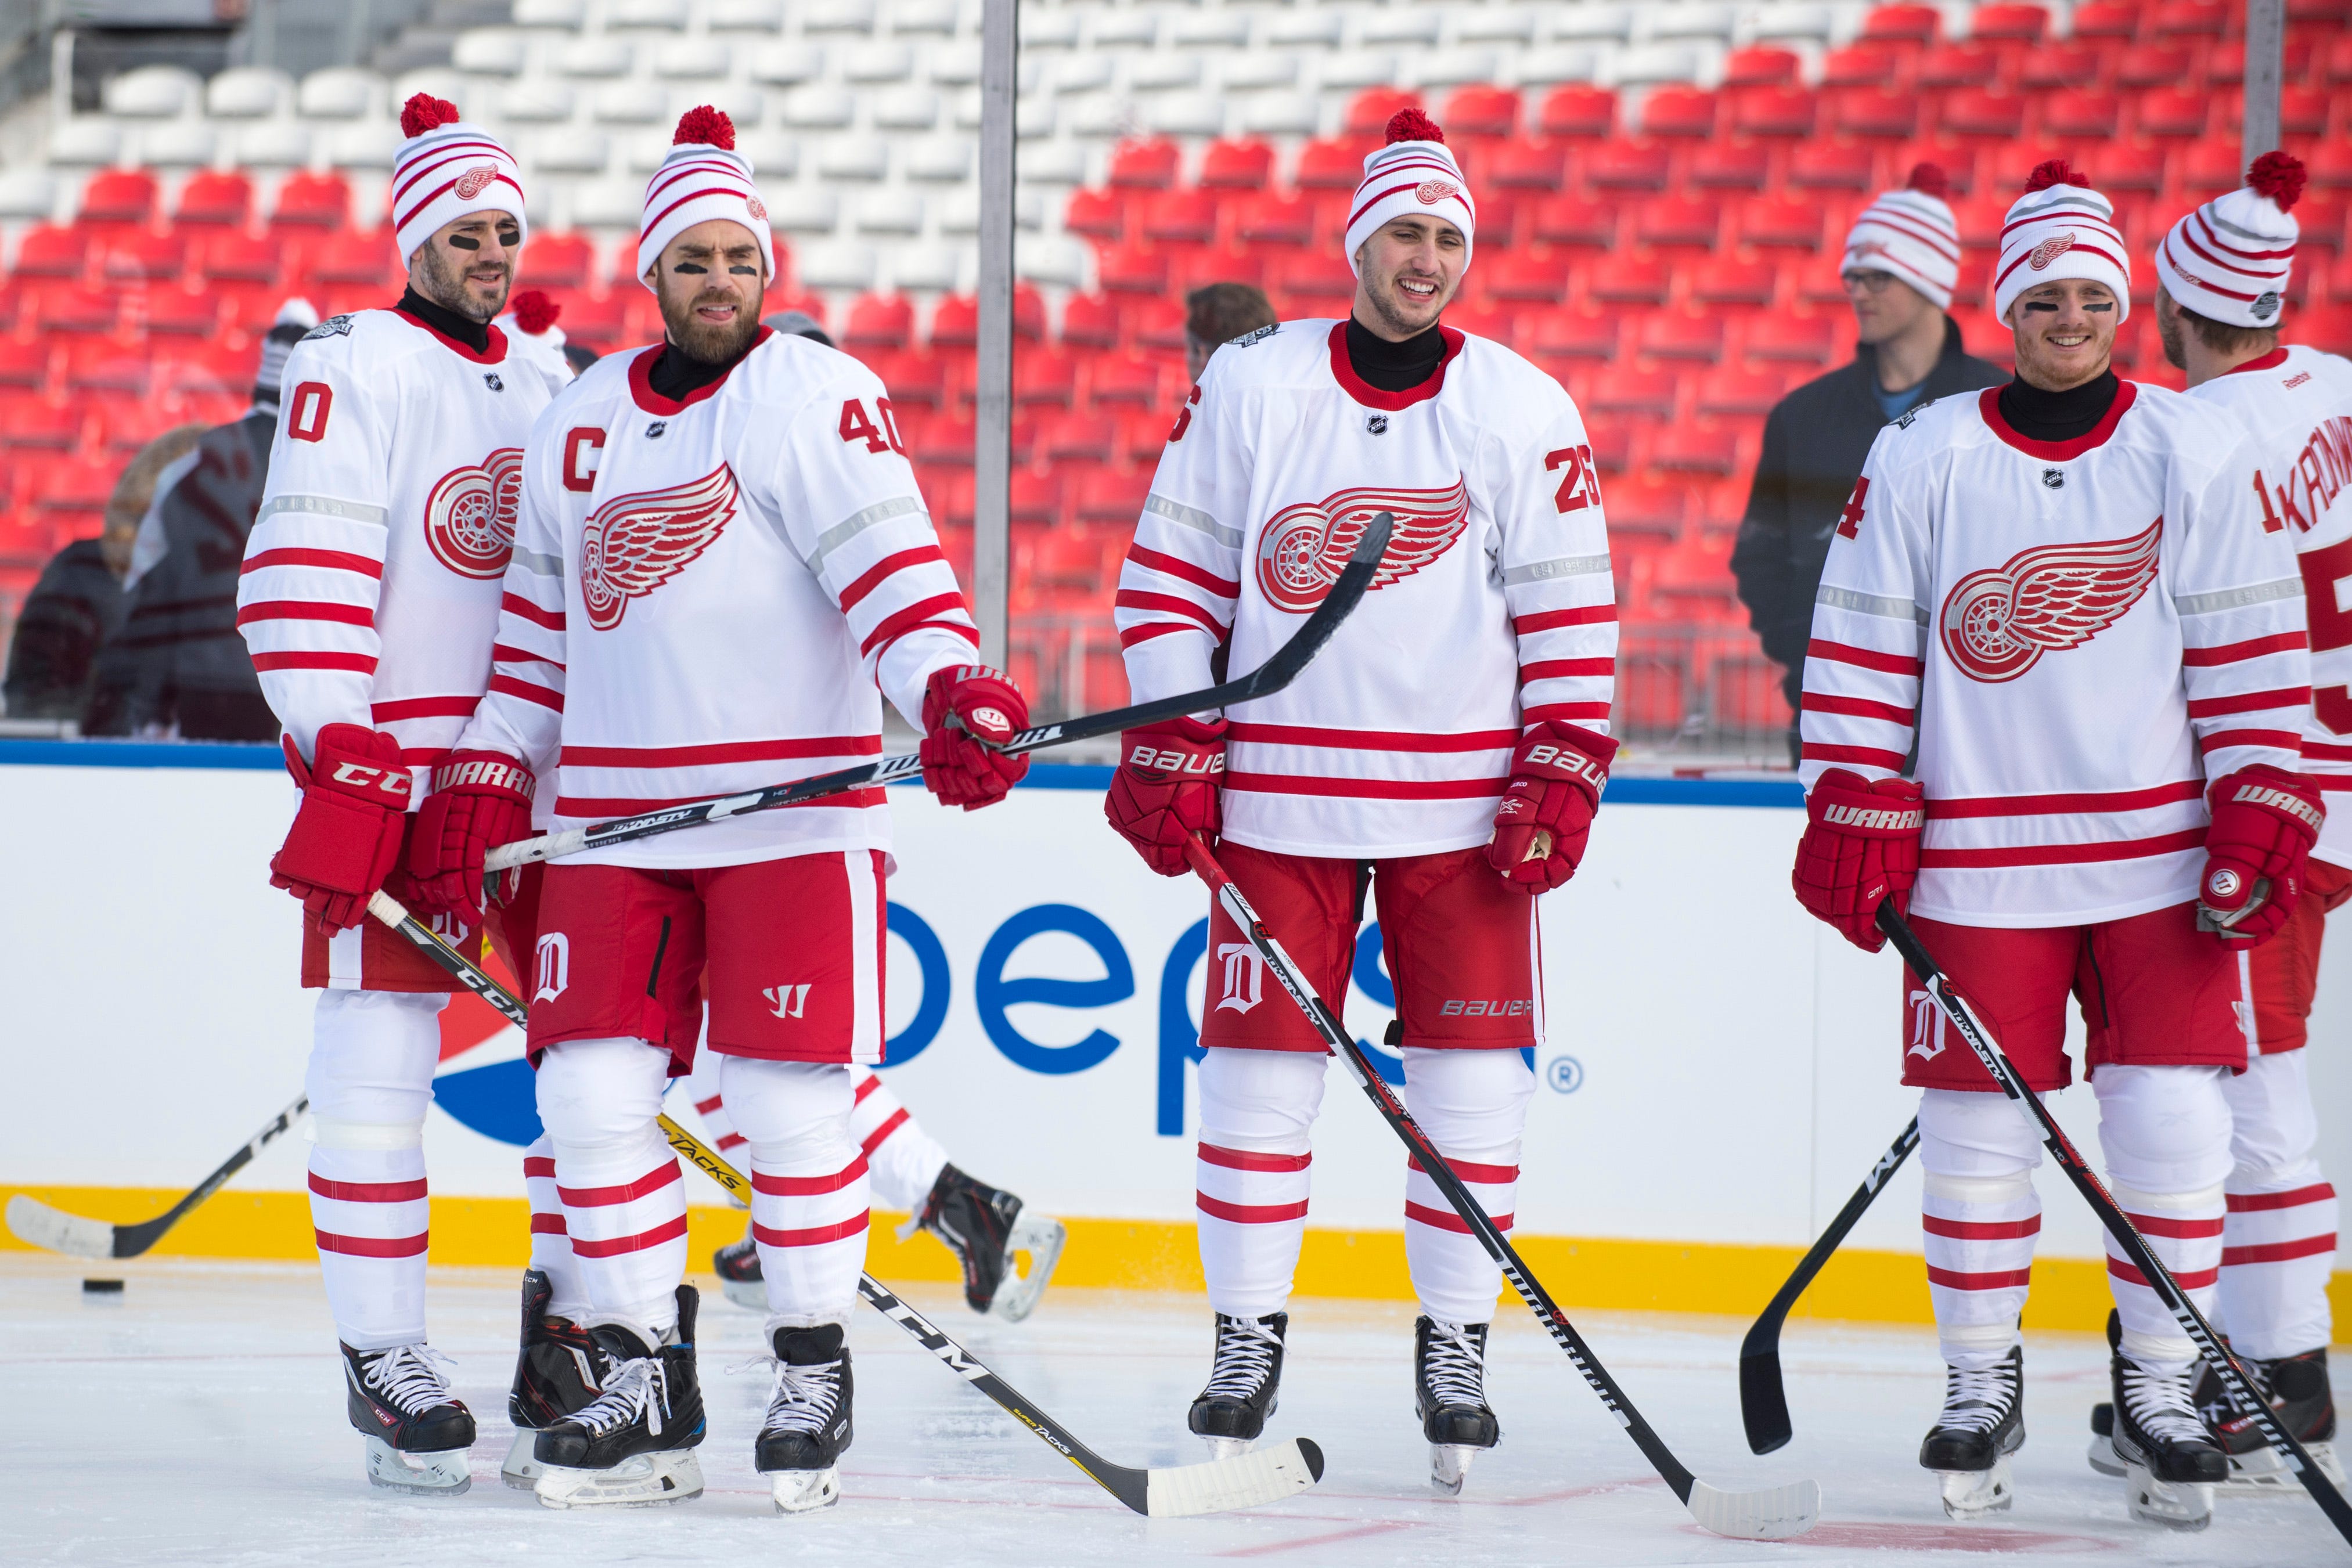 Detroit Red Wings left wing Henrik Zetterberg (40) and Detroit Red Wings right wing Tomas Jurco (26) have a laugh during the 2017 Scotiabank NHL Centennial Classic practice day for The Detroit Red Wings at Exhibition Stadium in Toronto on Dec. 30, 2016.